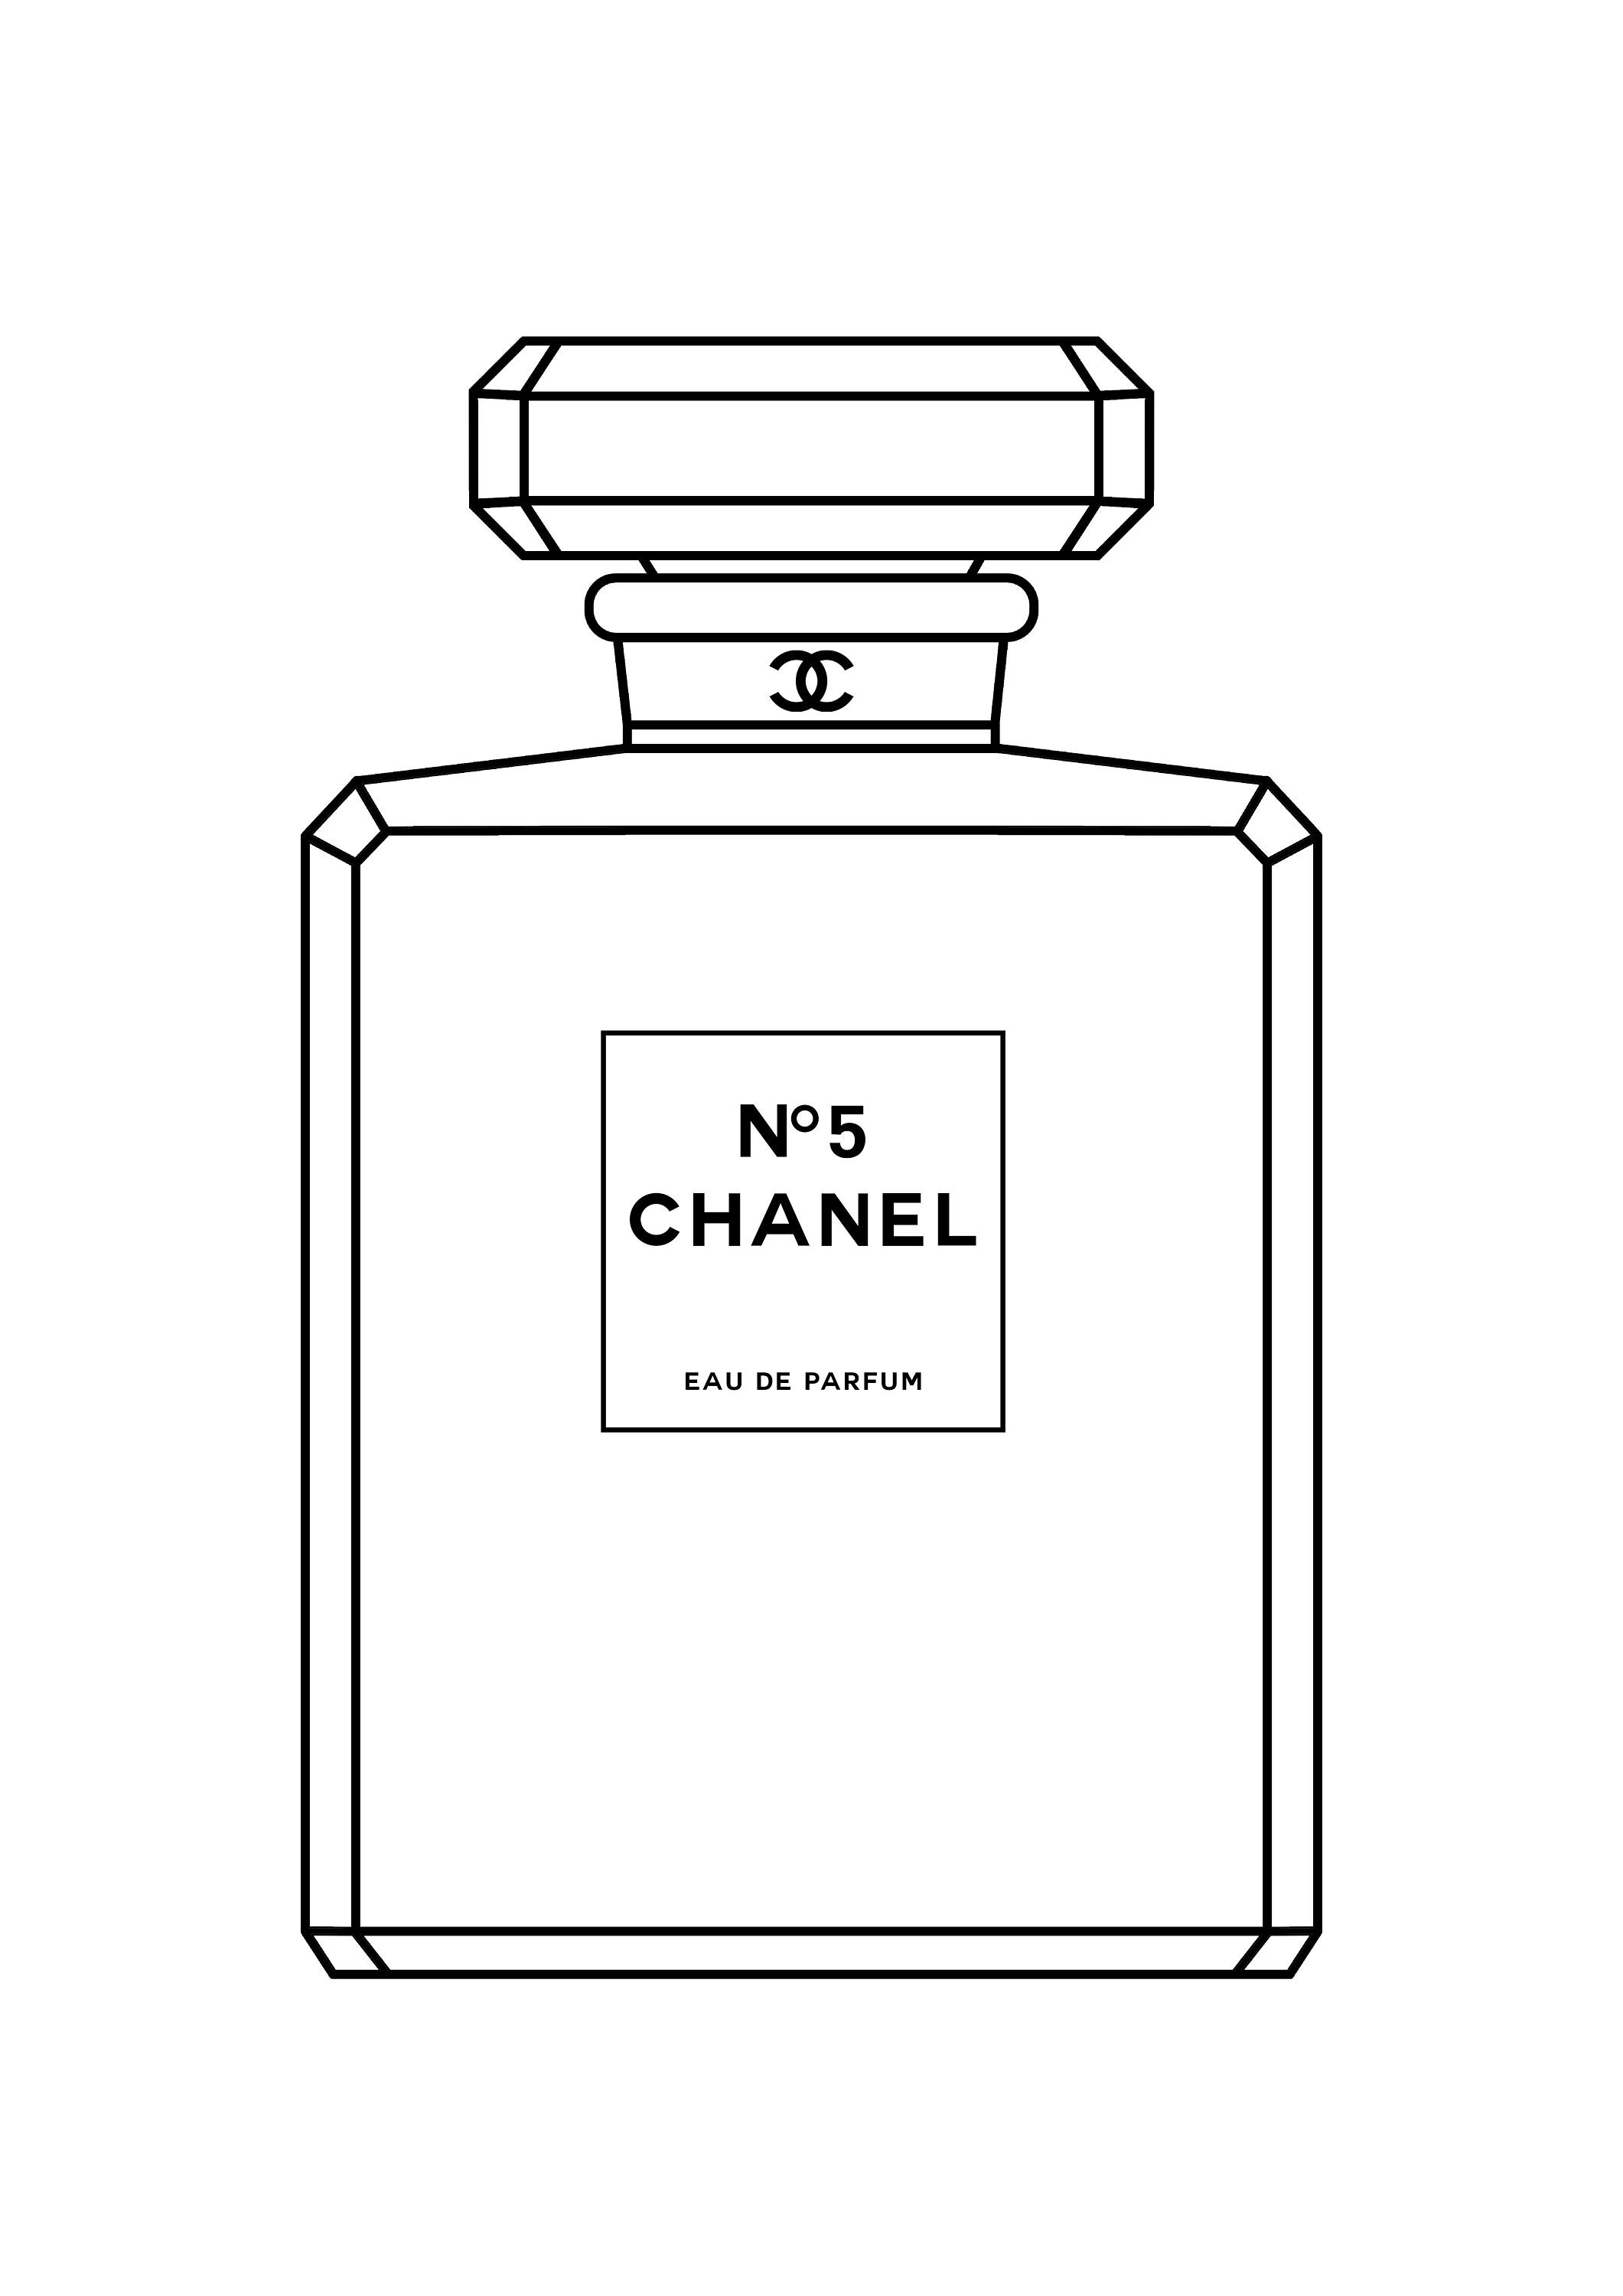 Chanel No 5 Perfume Bottle Wall Art Home Décor Wall | Etsy